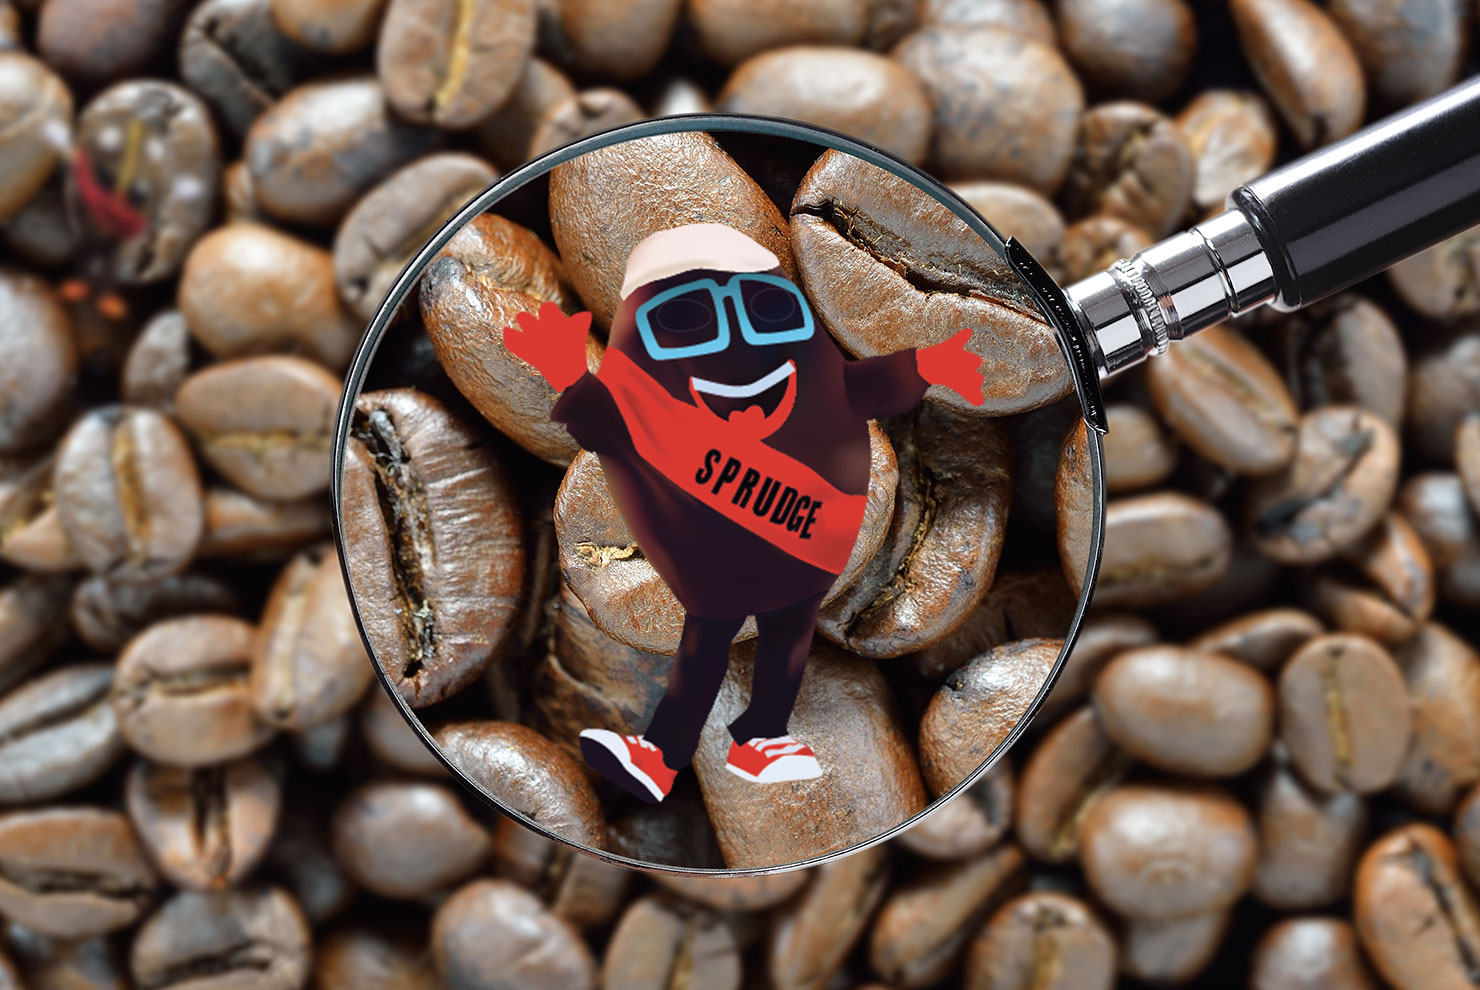 buzzy spesh magnifying glass coffee mascots sprudge